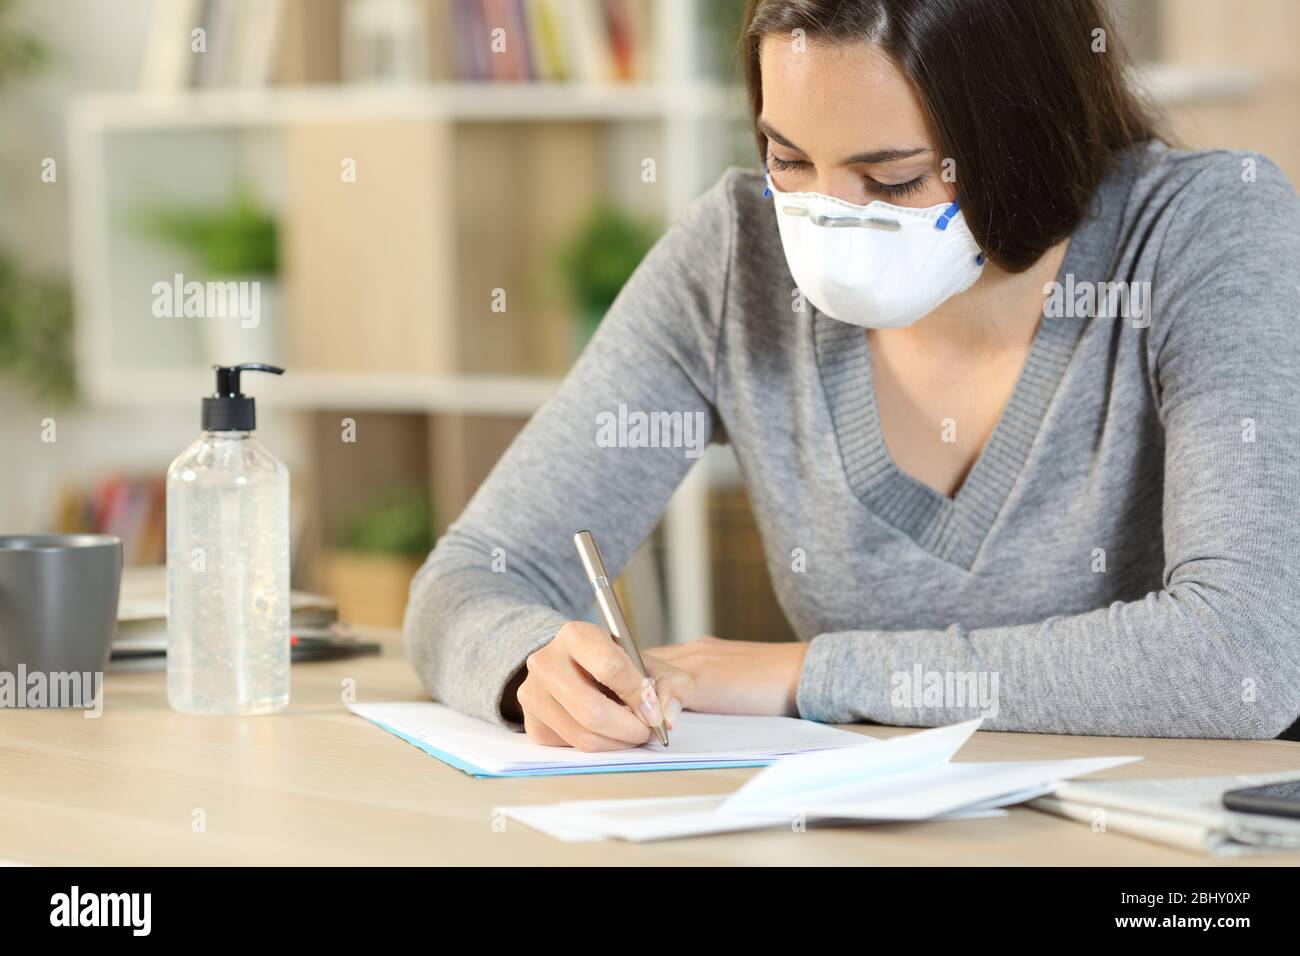 Woman with protective mask due coronavirus writing letter sitting on a desk at home Stock Photo